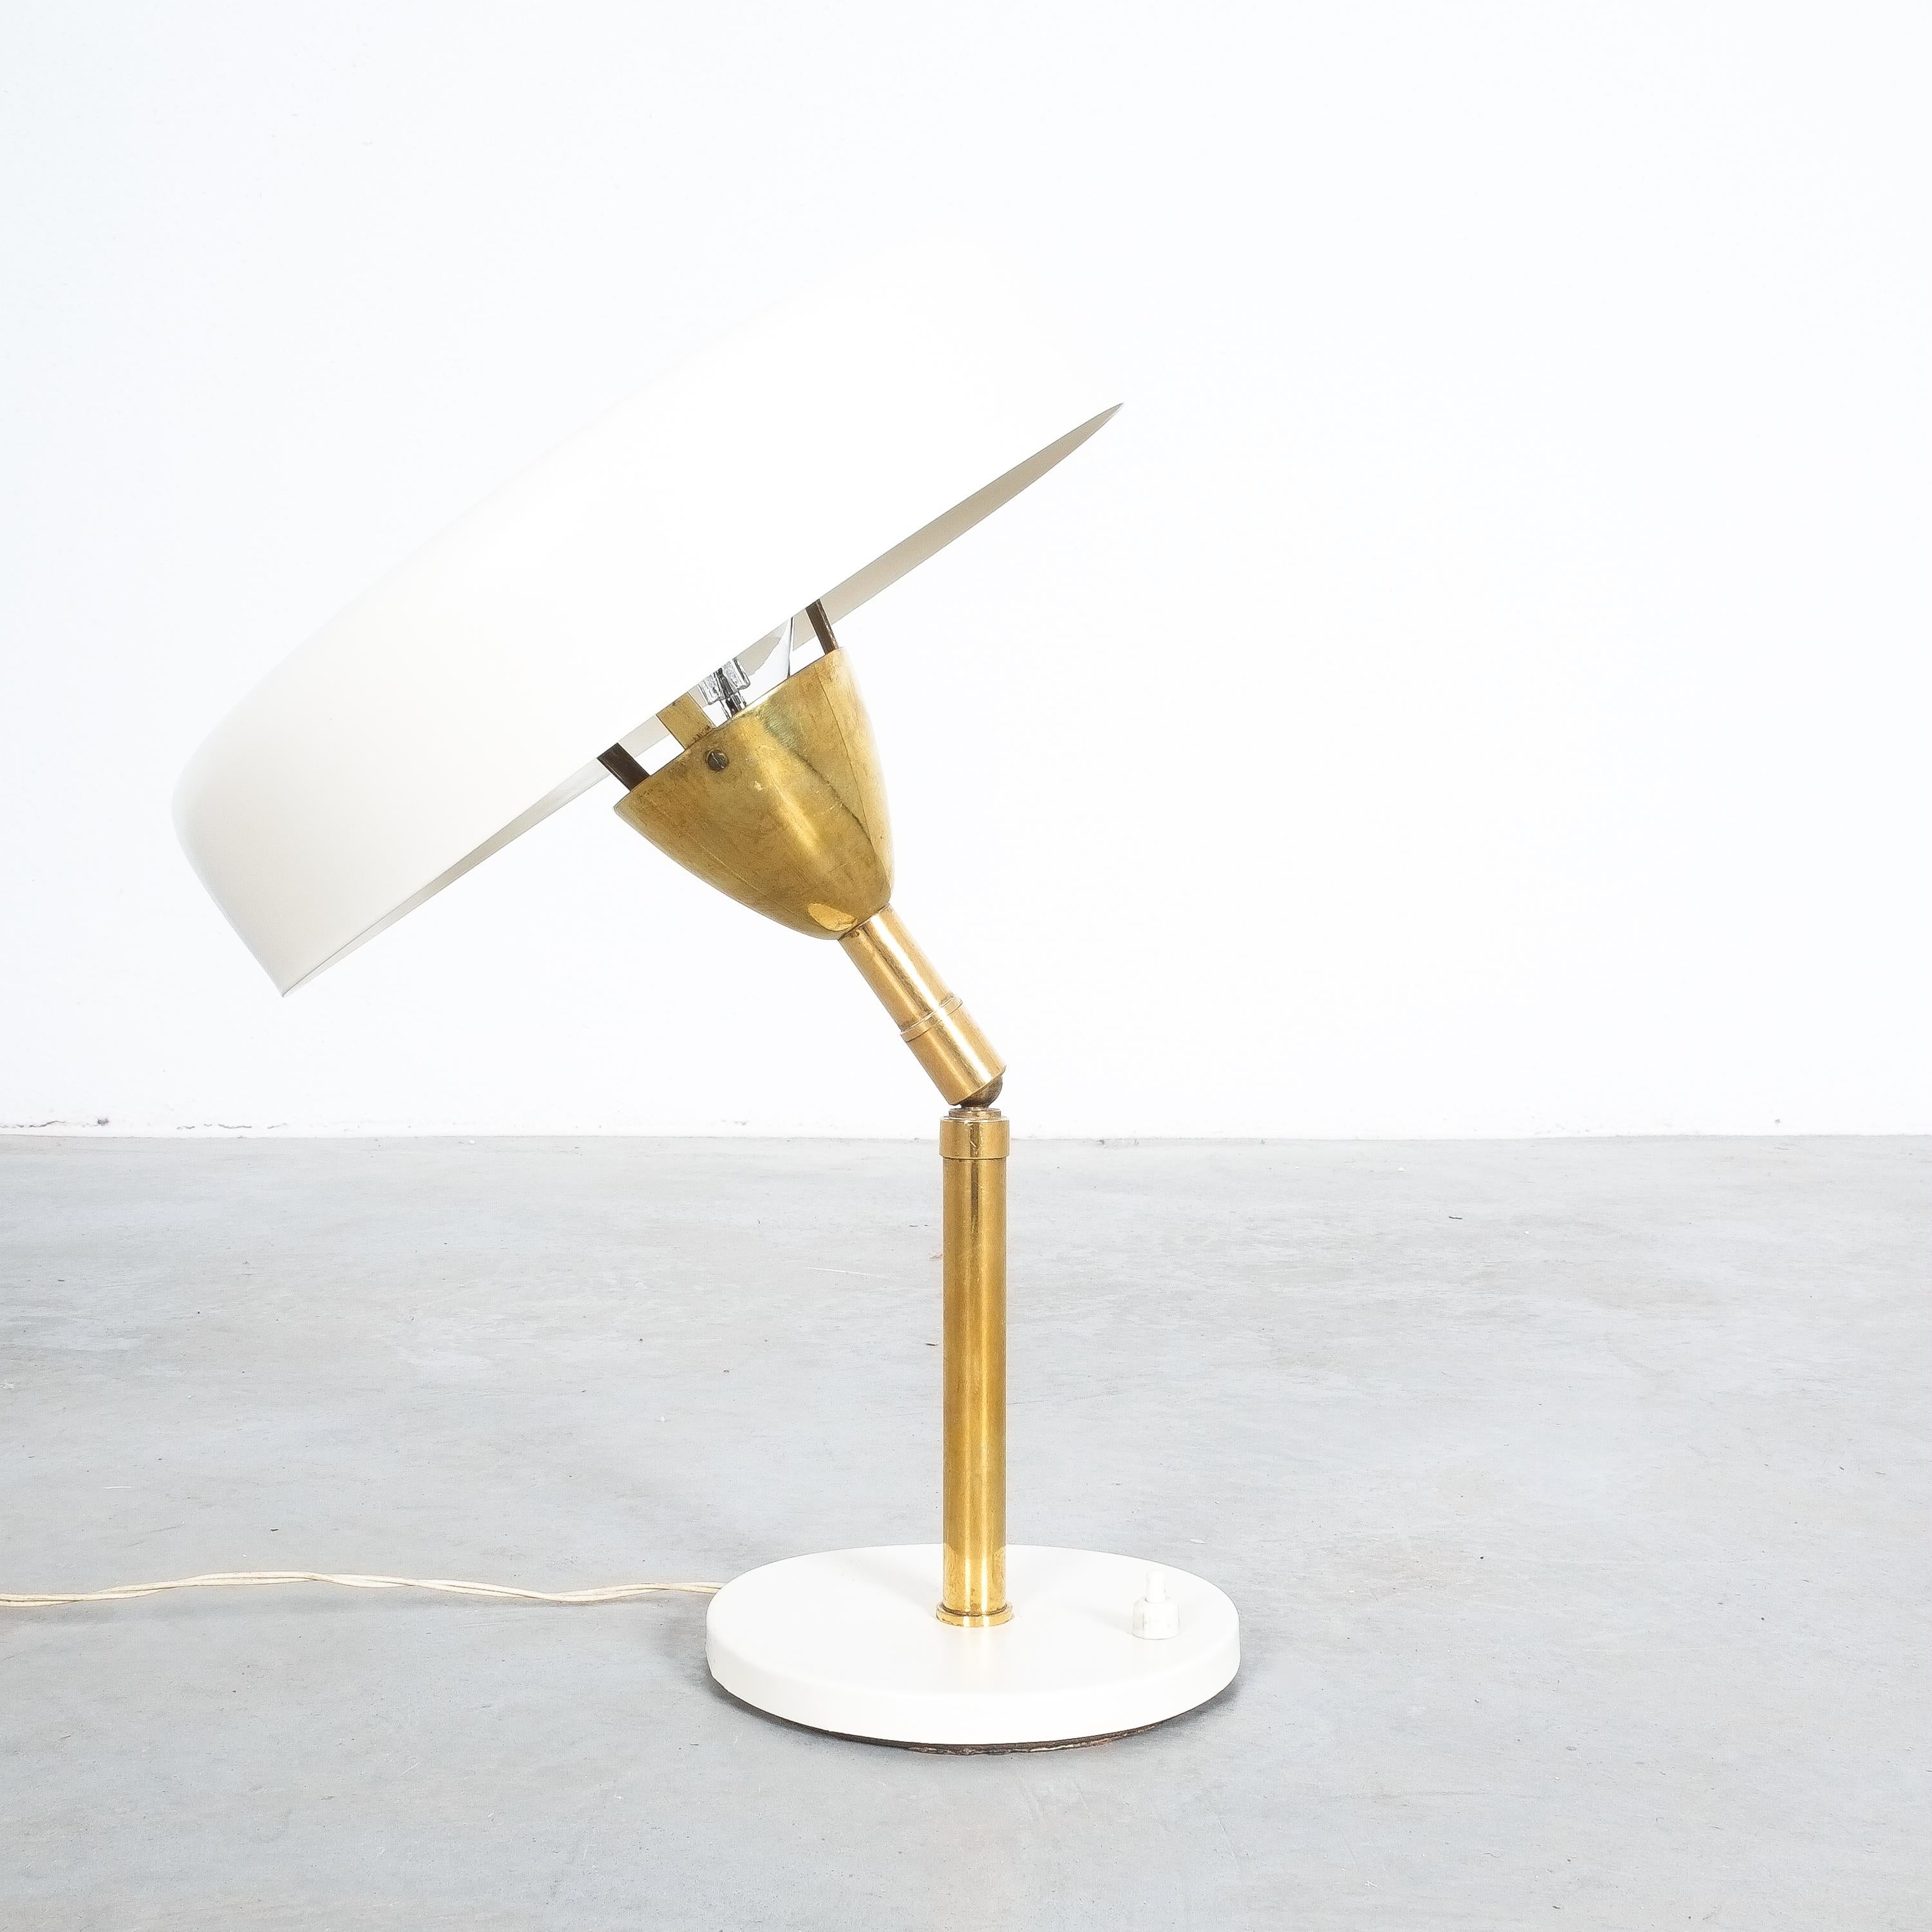 Cute fully 360 degree adjustable pivoting table light, Italy, circa 1955

Very beautiful and fully functional small Italian table light from eggshell colored lacquered sheet metal and brass. It is in very good vintage condition, showing minor